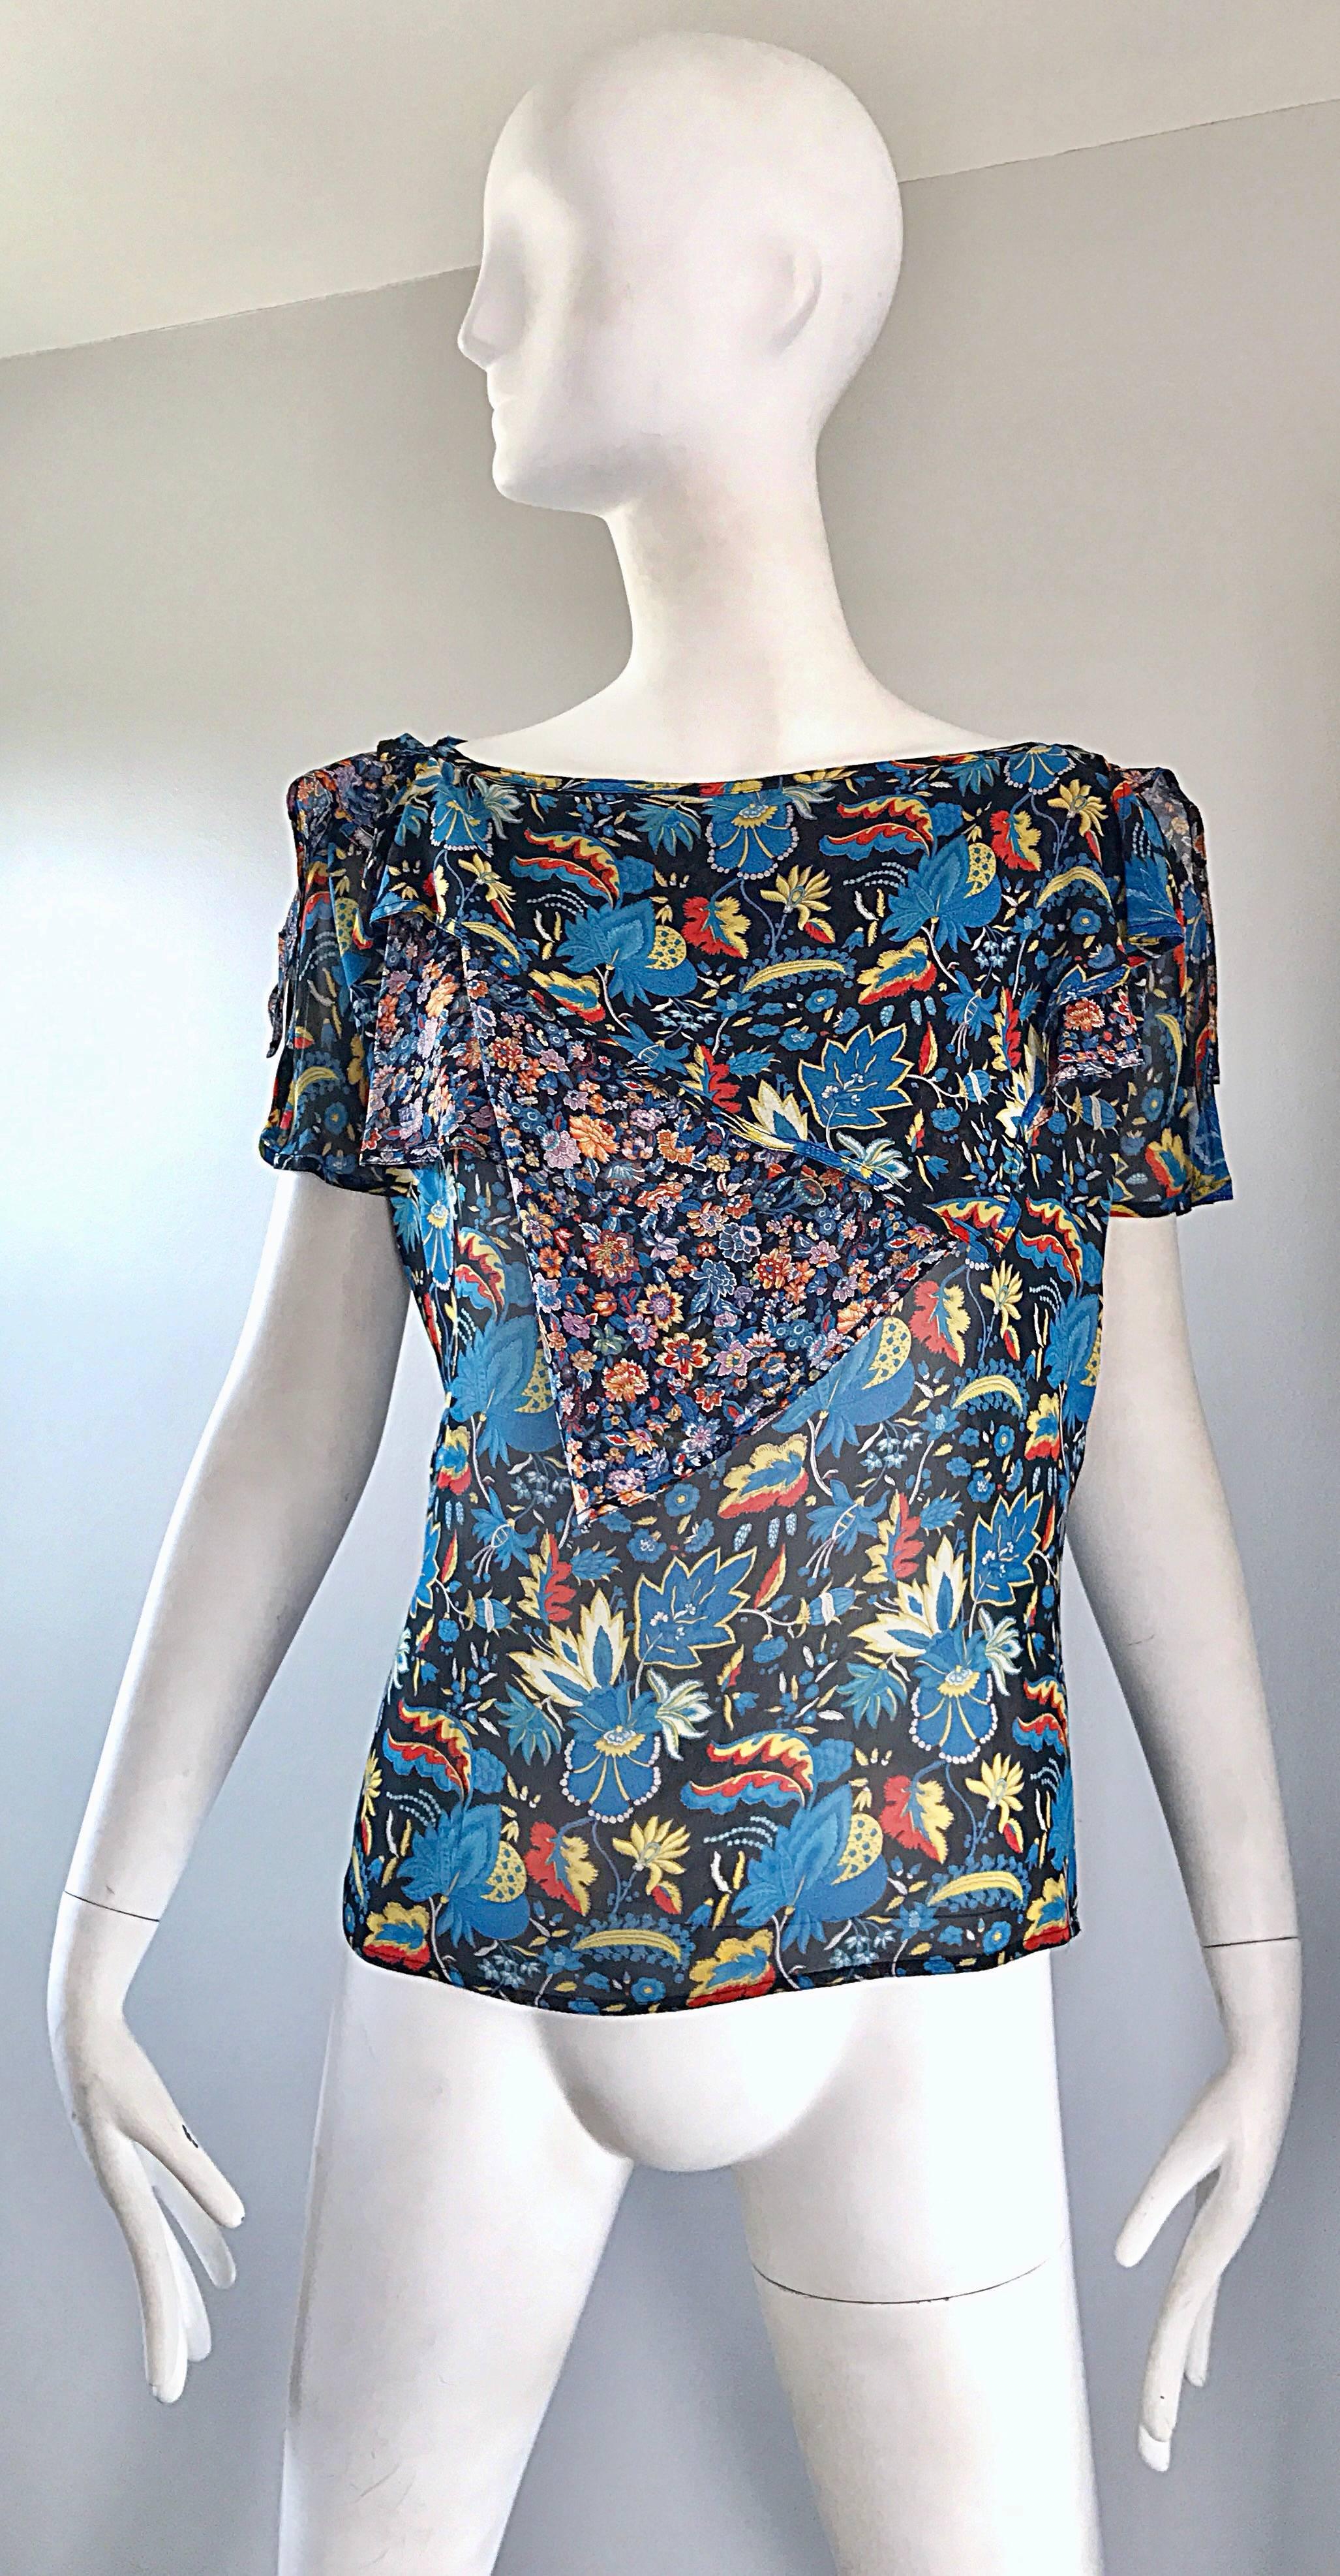 Rare late 1970s GIANNI VERSACE cold-shoulder silk boho hippie blouse! This historic shirt comes from one of Versace's first collections in 1979. Draped layers on the front and back. Simply slips over the head. Vibrant colors of blue, red, yellow and